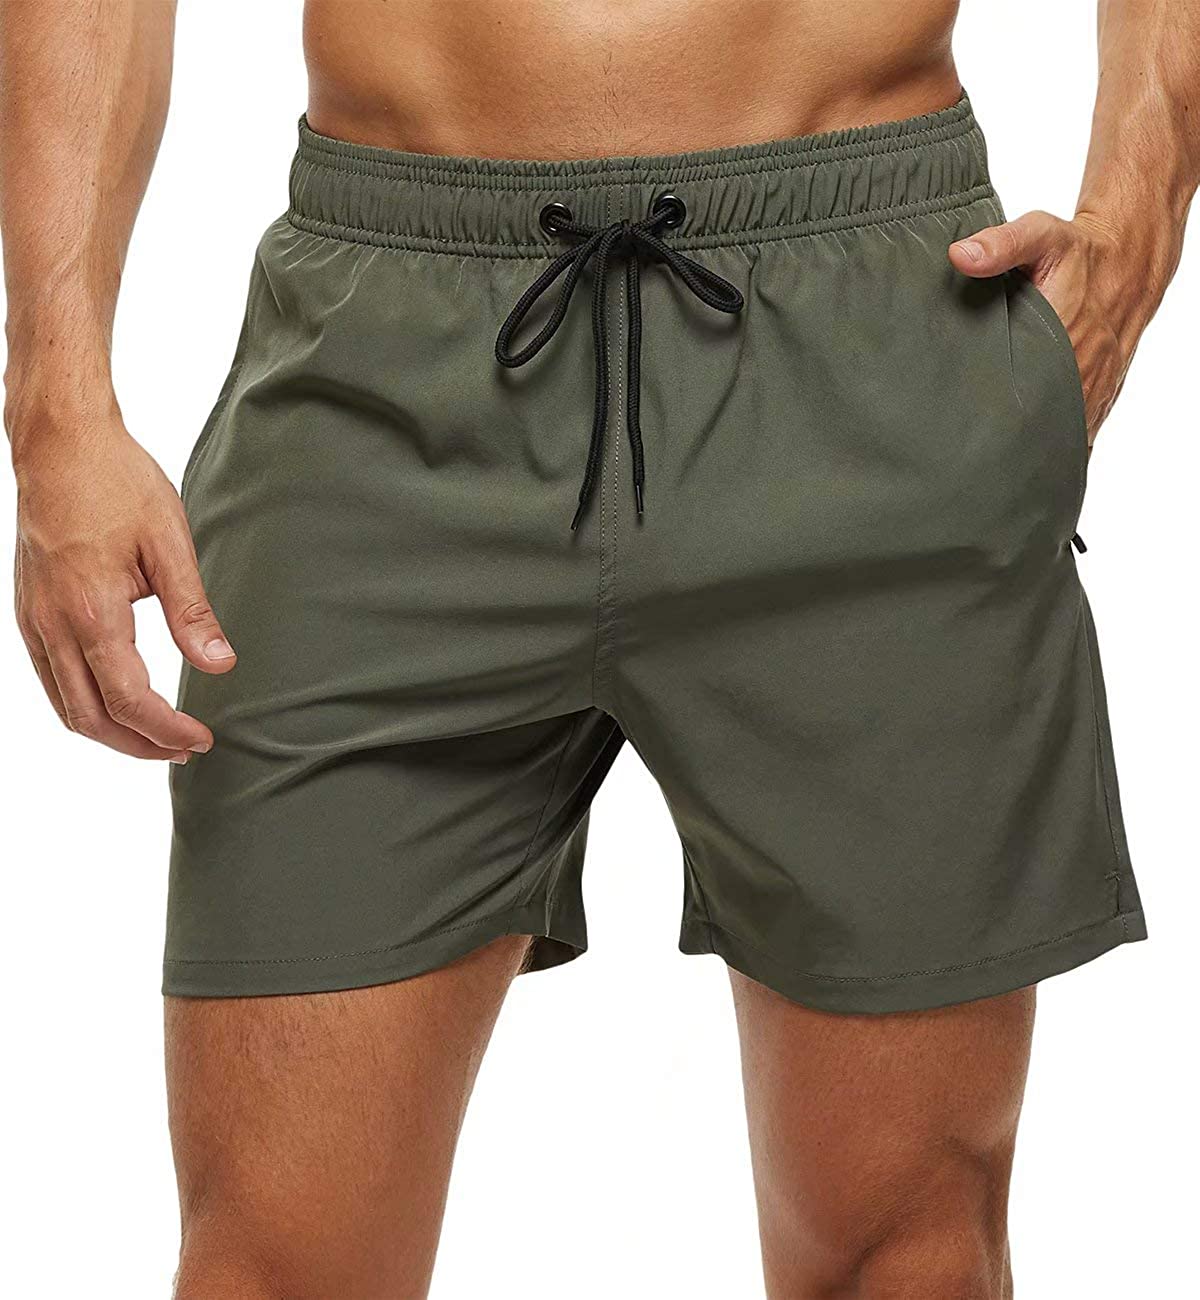 Crtsyins Inyin Mens Quick Dry Beach Shorts with Mesh Lining Swimwear Bathing Suits 